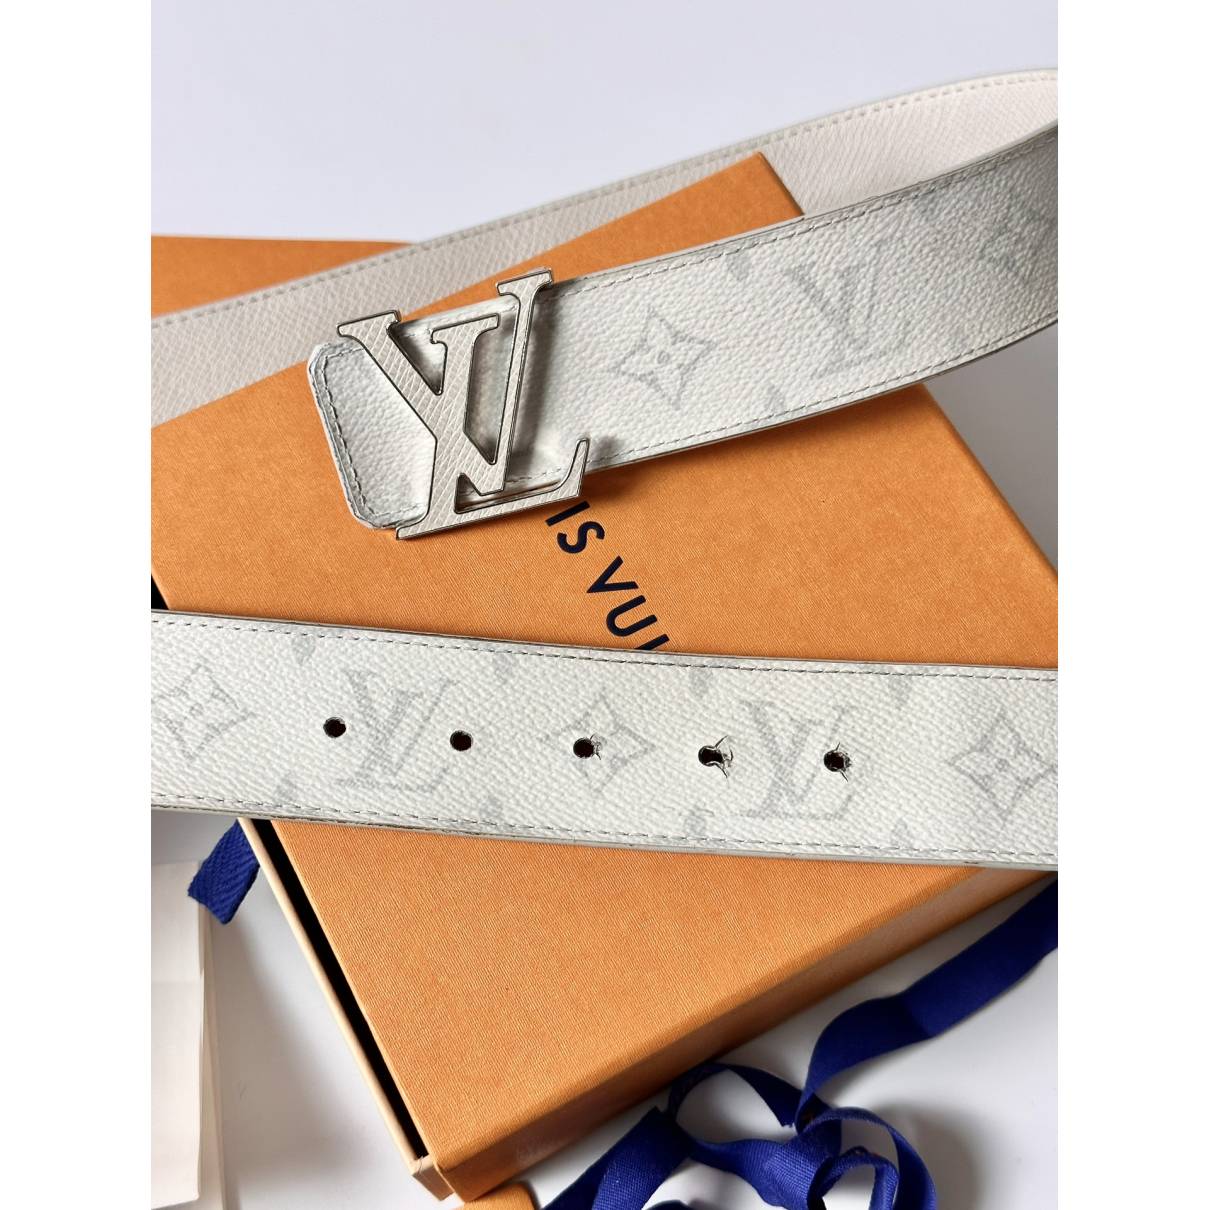 Authentic New Louis Vuitton By Pool 30 MM BELT SIZE 85 Limited Edition with  Tags